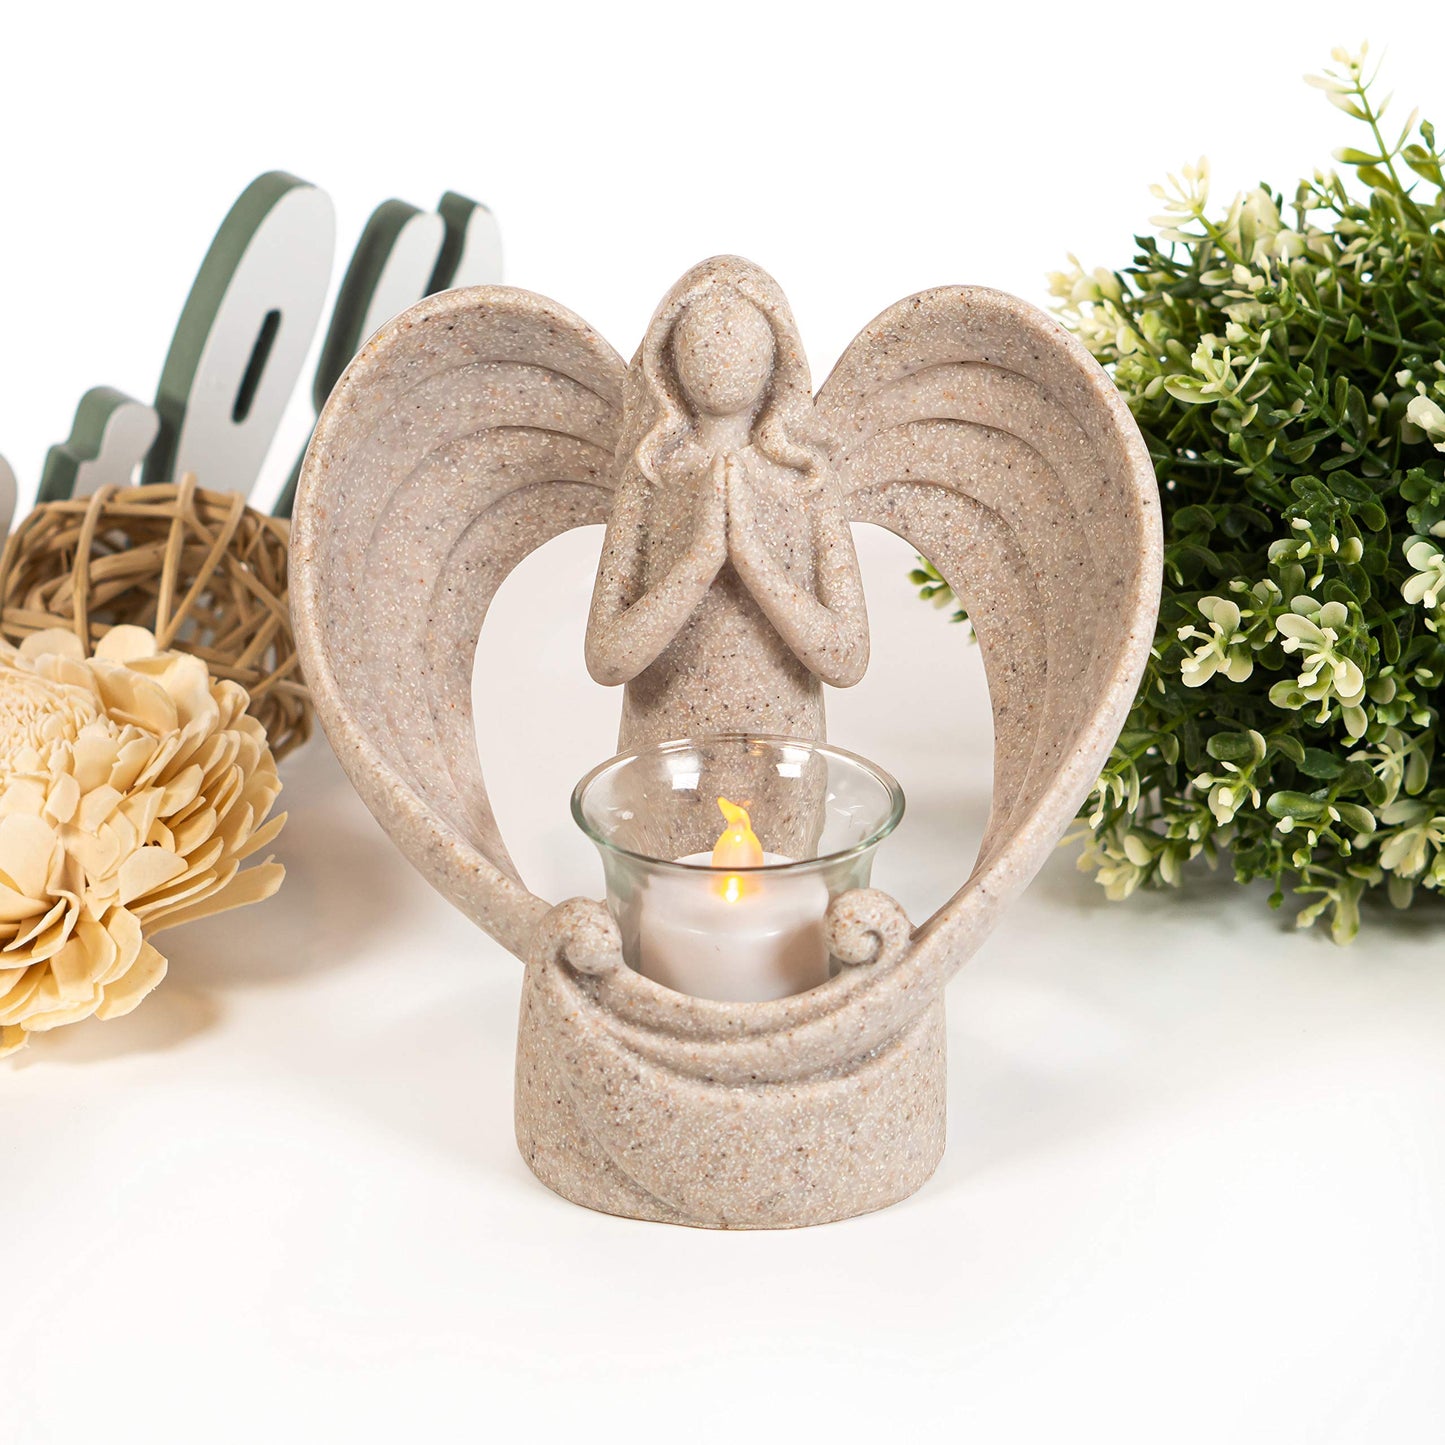 Angel Memorial Gifts Tealight Candle Holder, Sympathy Gift Candle Remembrance Gifts Bereavement Gifts Condolence Gifts Grieving Gifts for Loss of Loved One, Angel Figurines with LED Flickering Candle